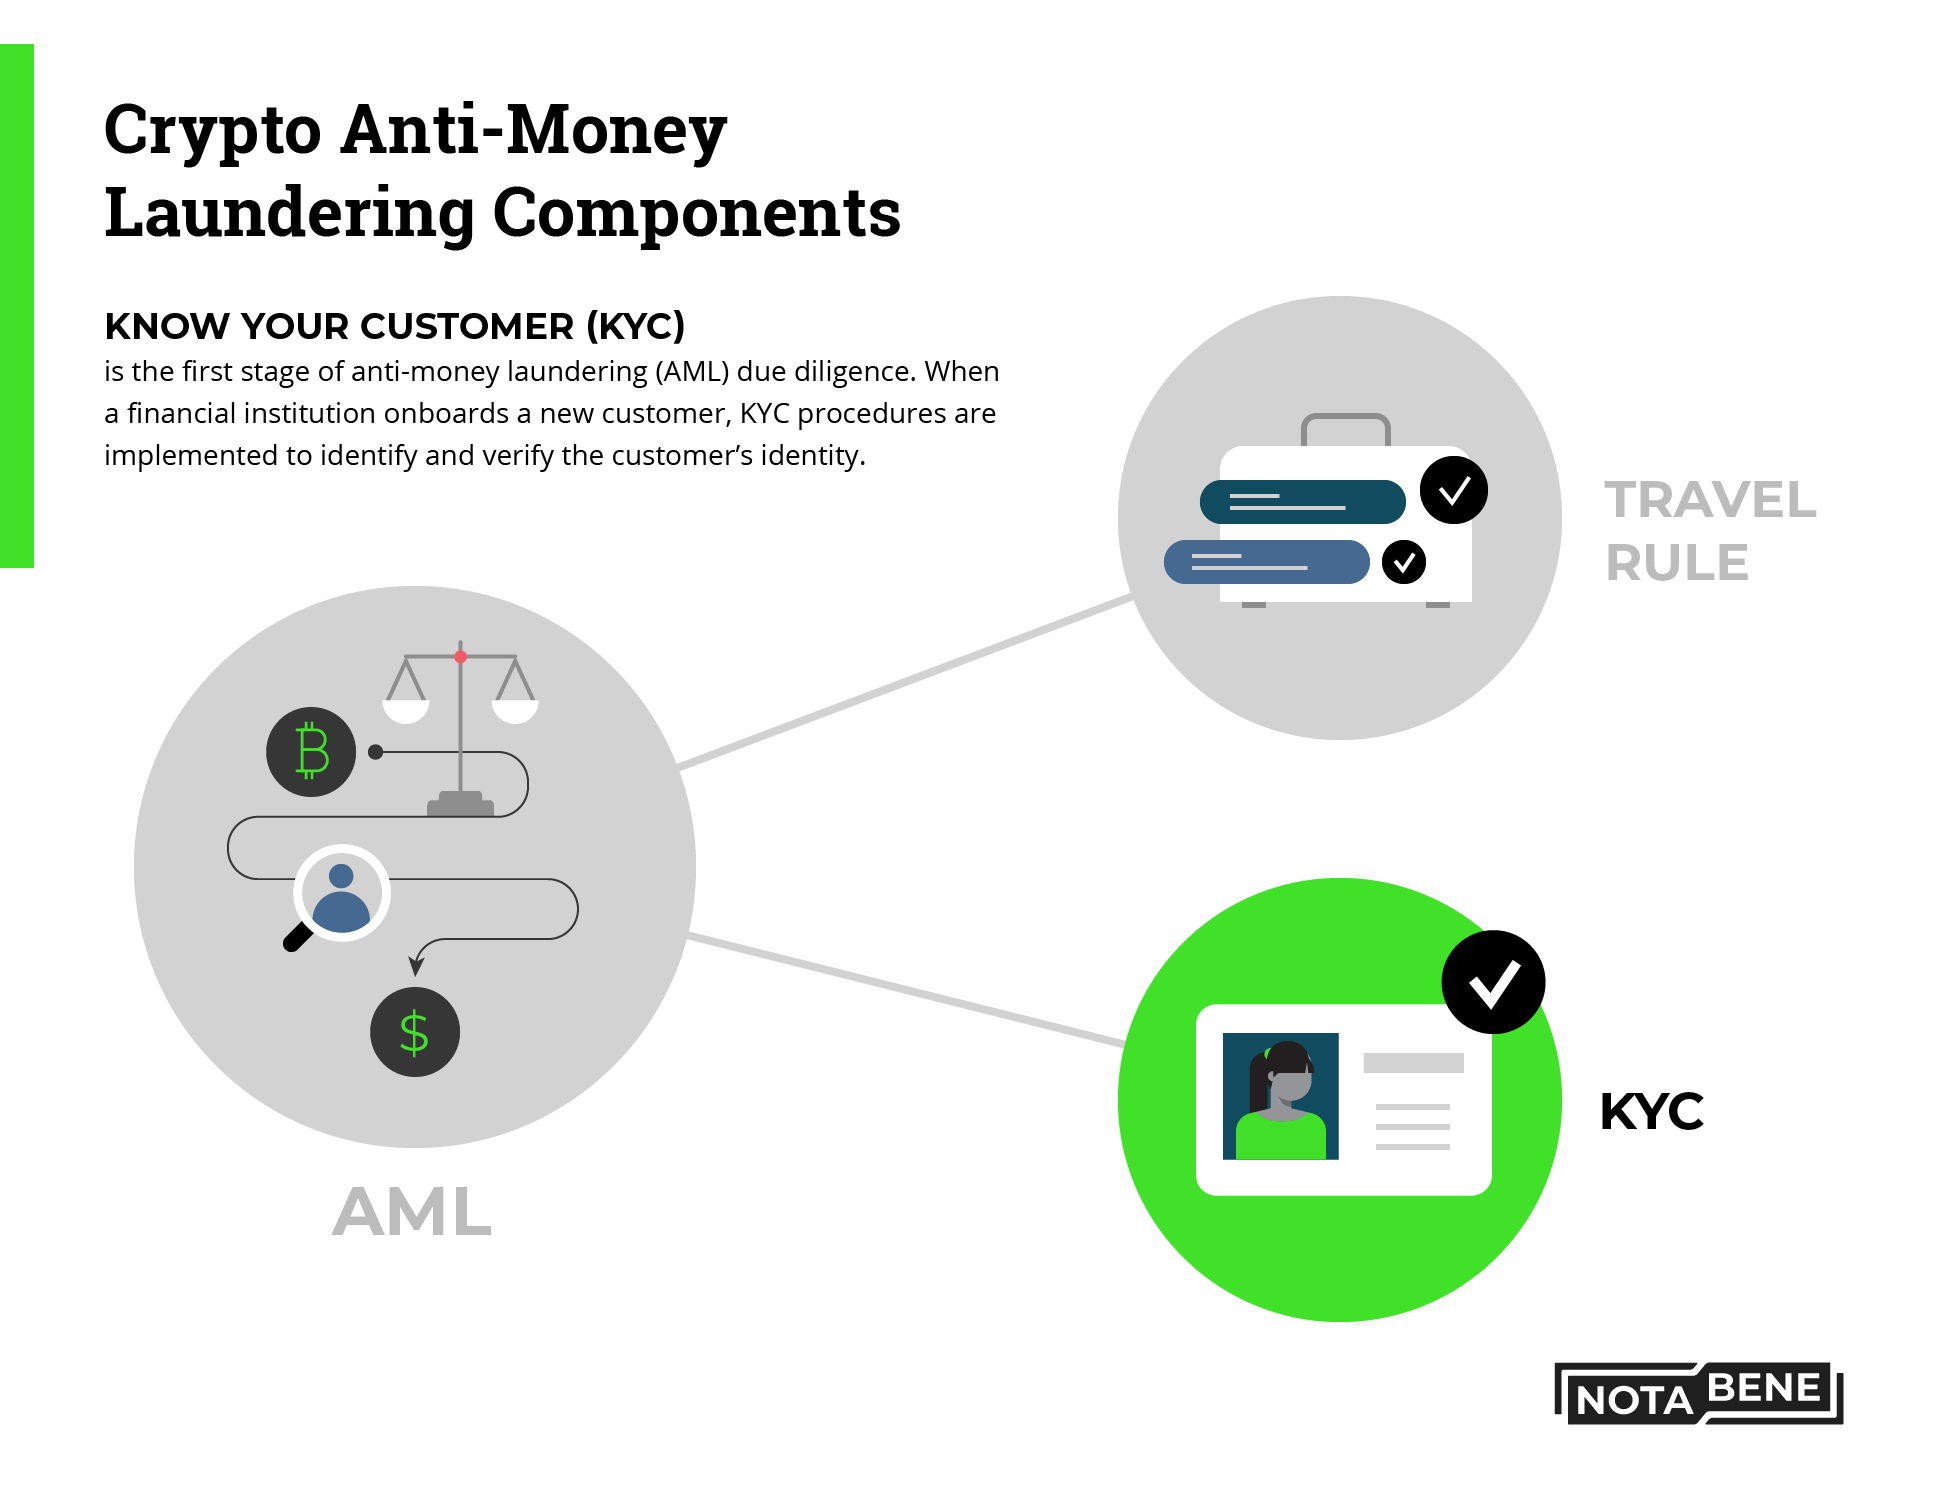 What is KYC in crypto and why do crypto exchanges require it?